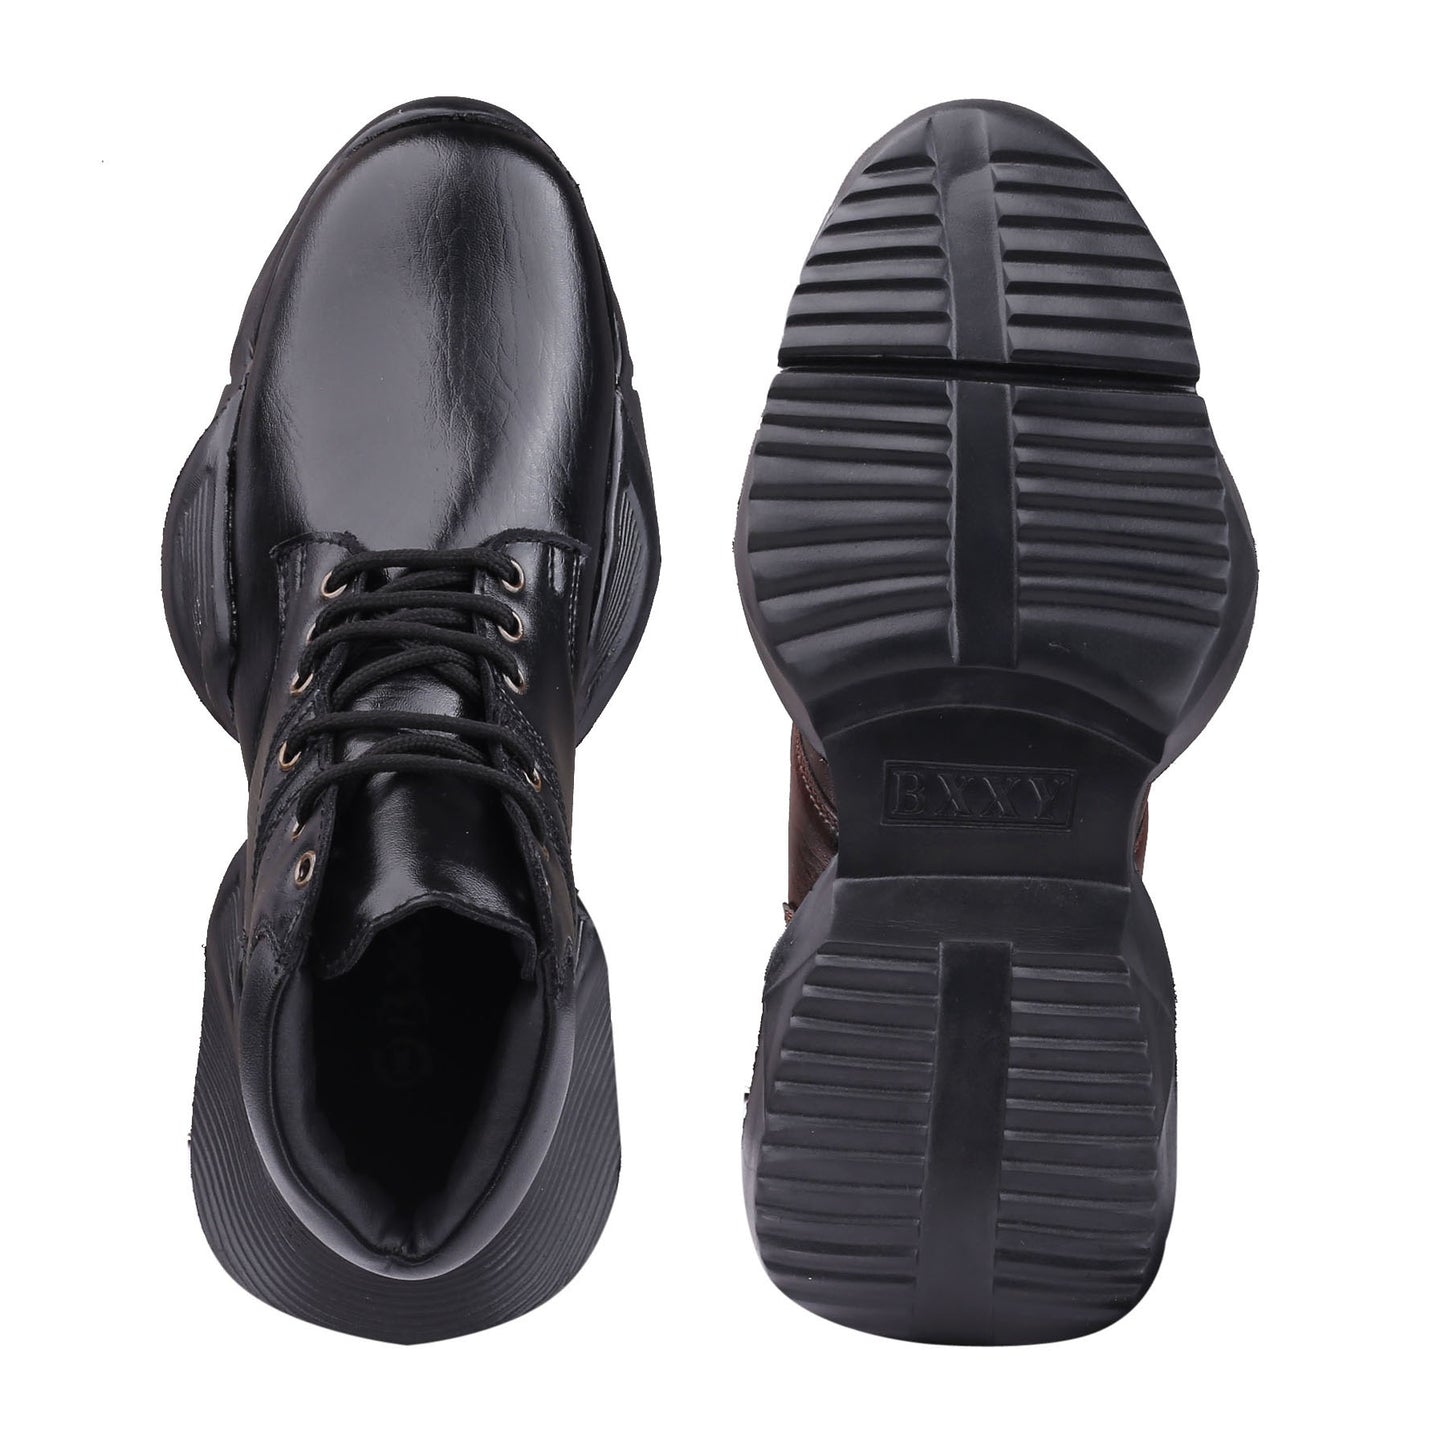 Men's 4 Inch Hidden Height Increasing/ Elevator Shoes Synthetic Leather Material Casual Sports shoes With Eva sole Making.